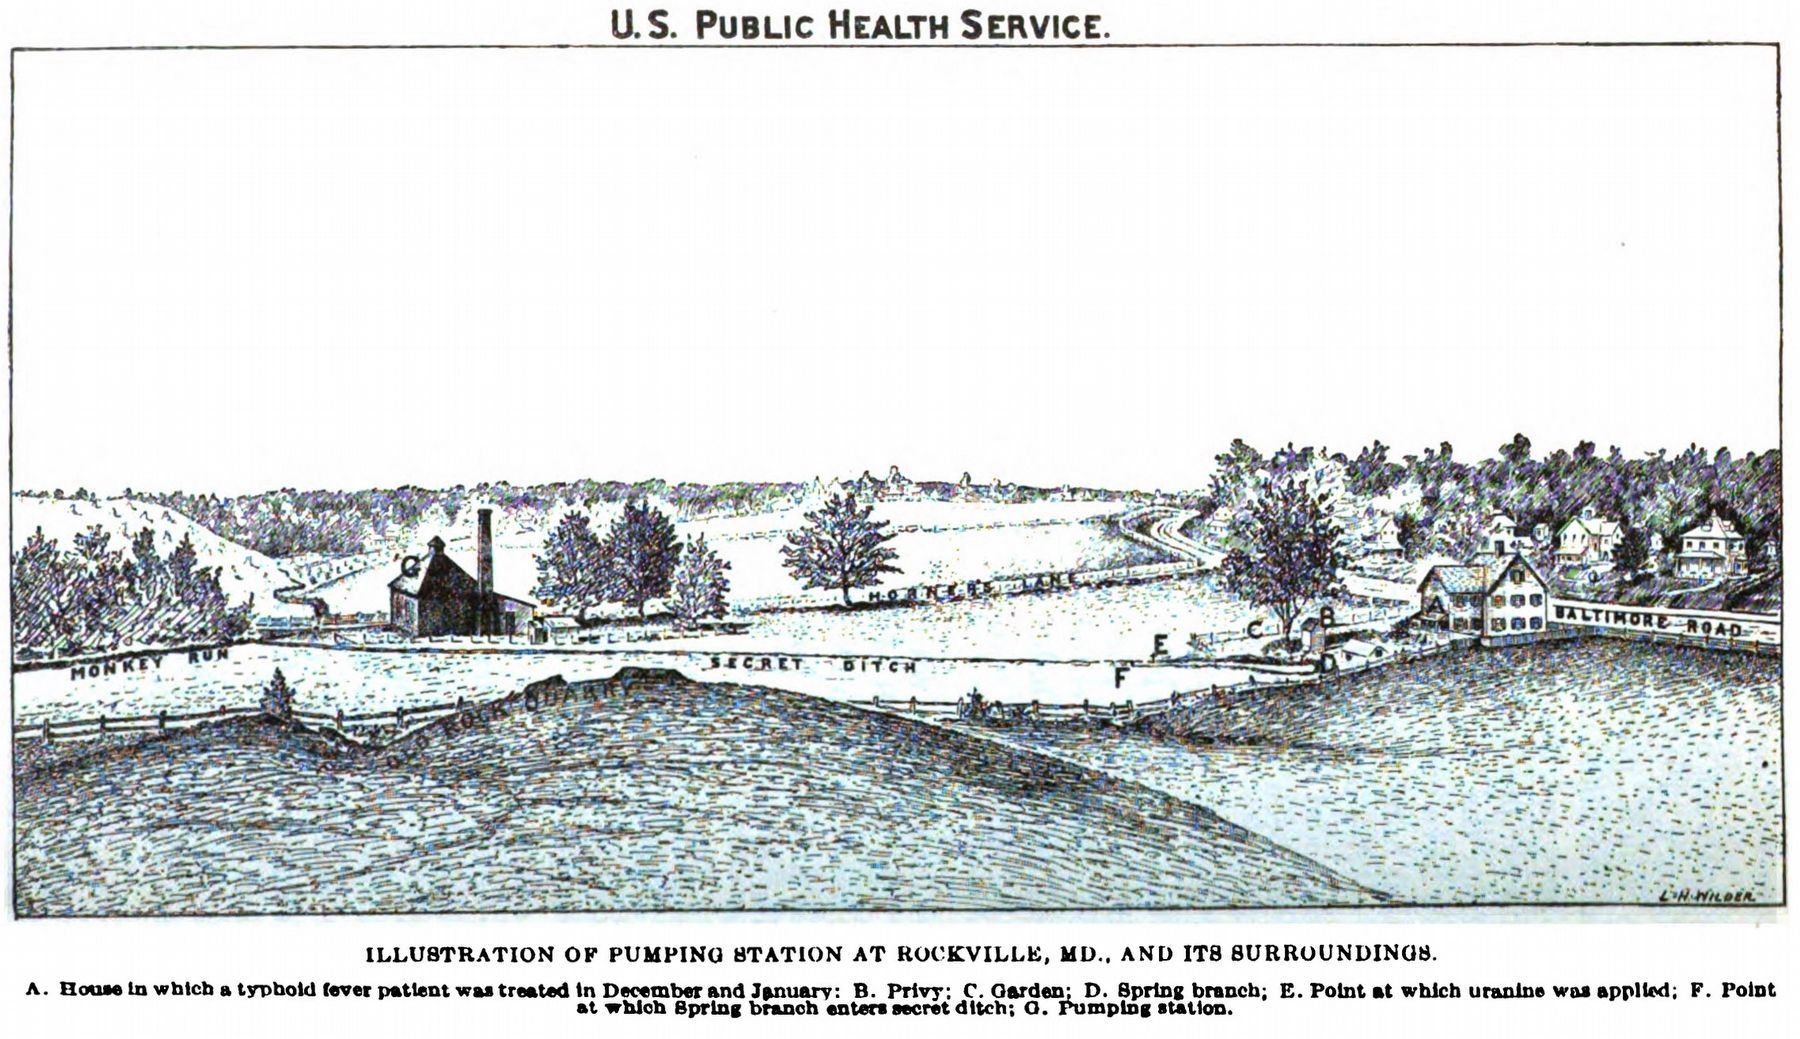 Illustration of Pumping Station at Rockville, MD and Its Surroundings<br>(Lumsden, 1914) image. Click for full size.